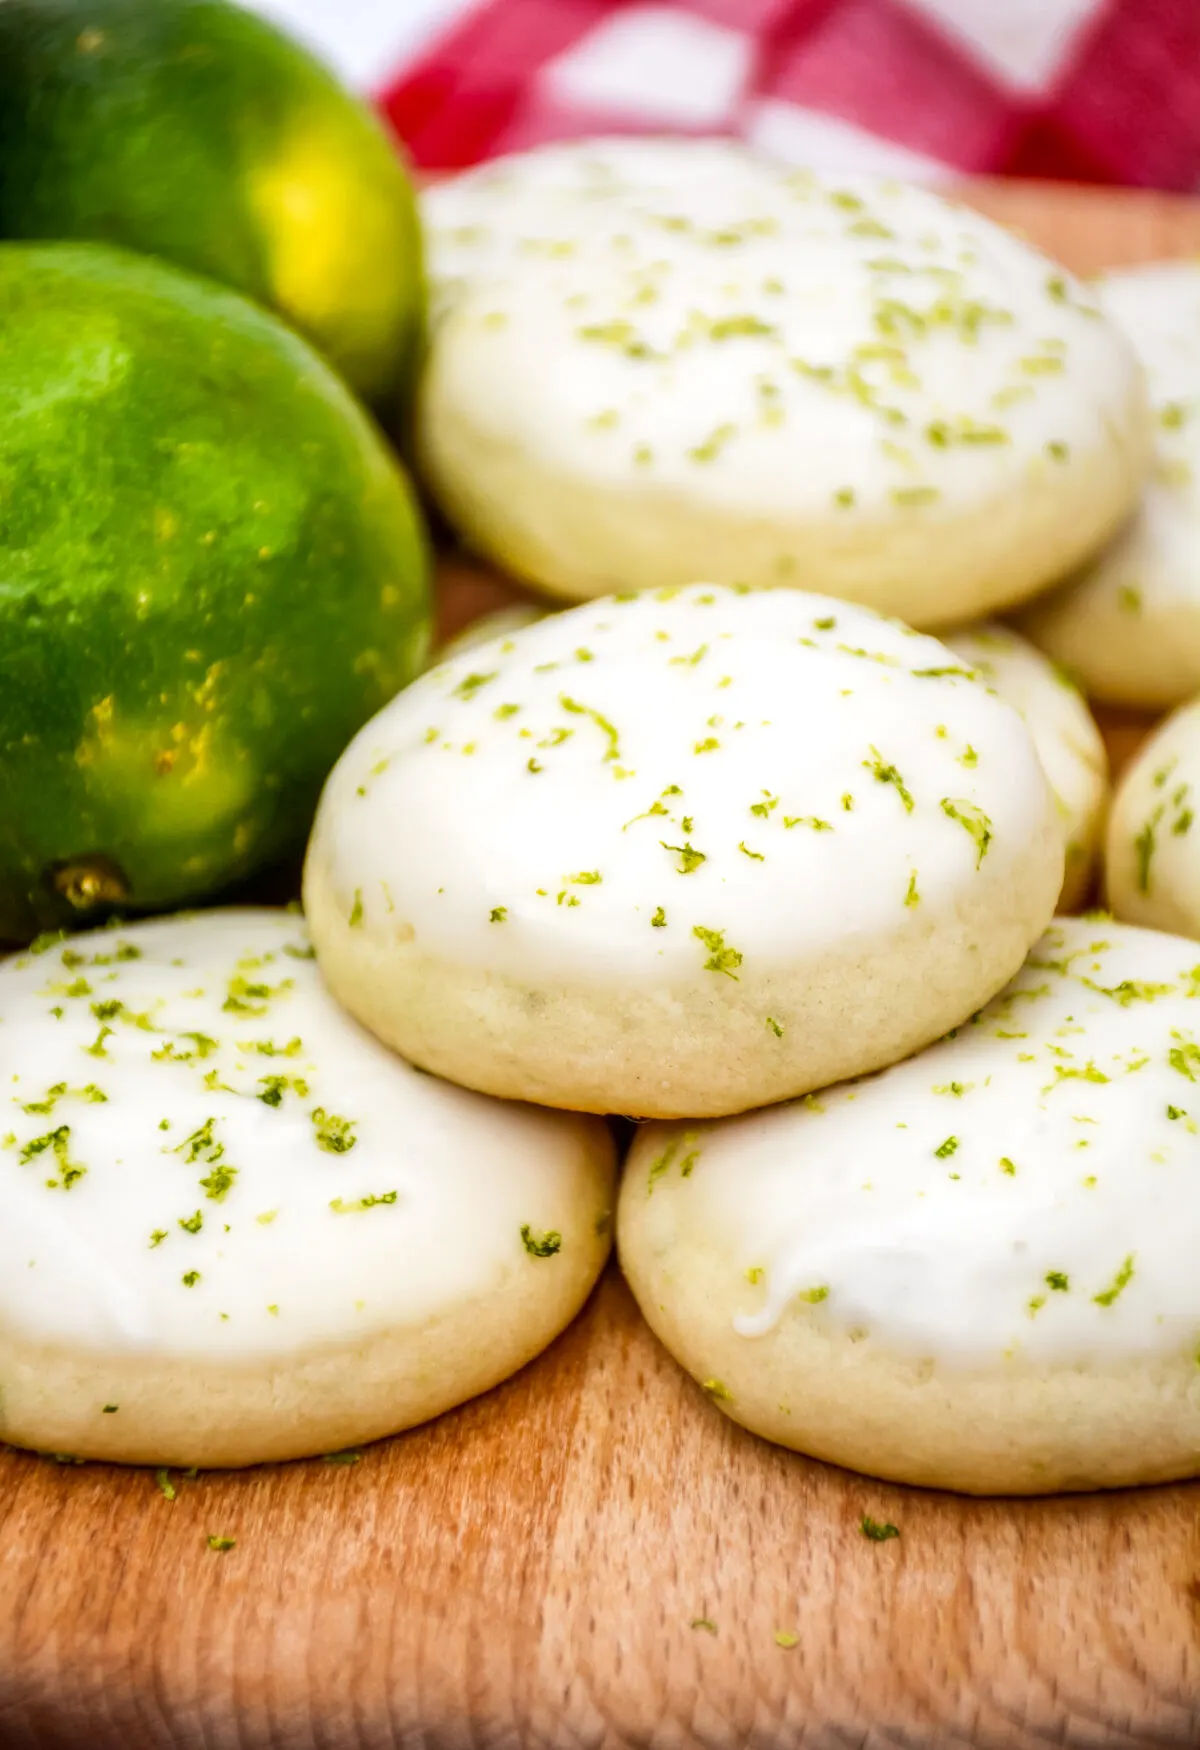 Soft, buttery cookies loaded with key lime flavor - perfect for summer! These key lime meltaway cookies are easy to make and so delicious.